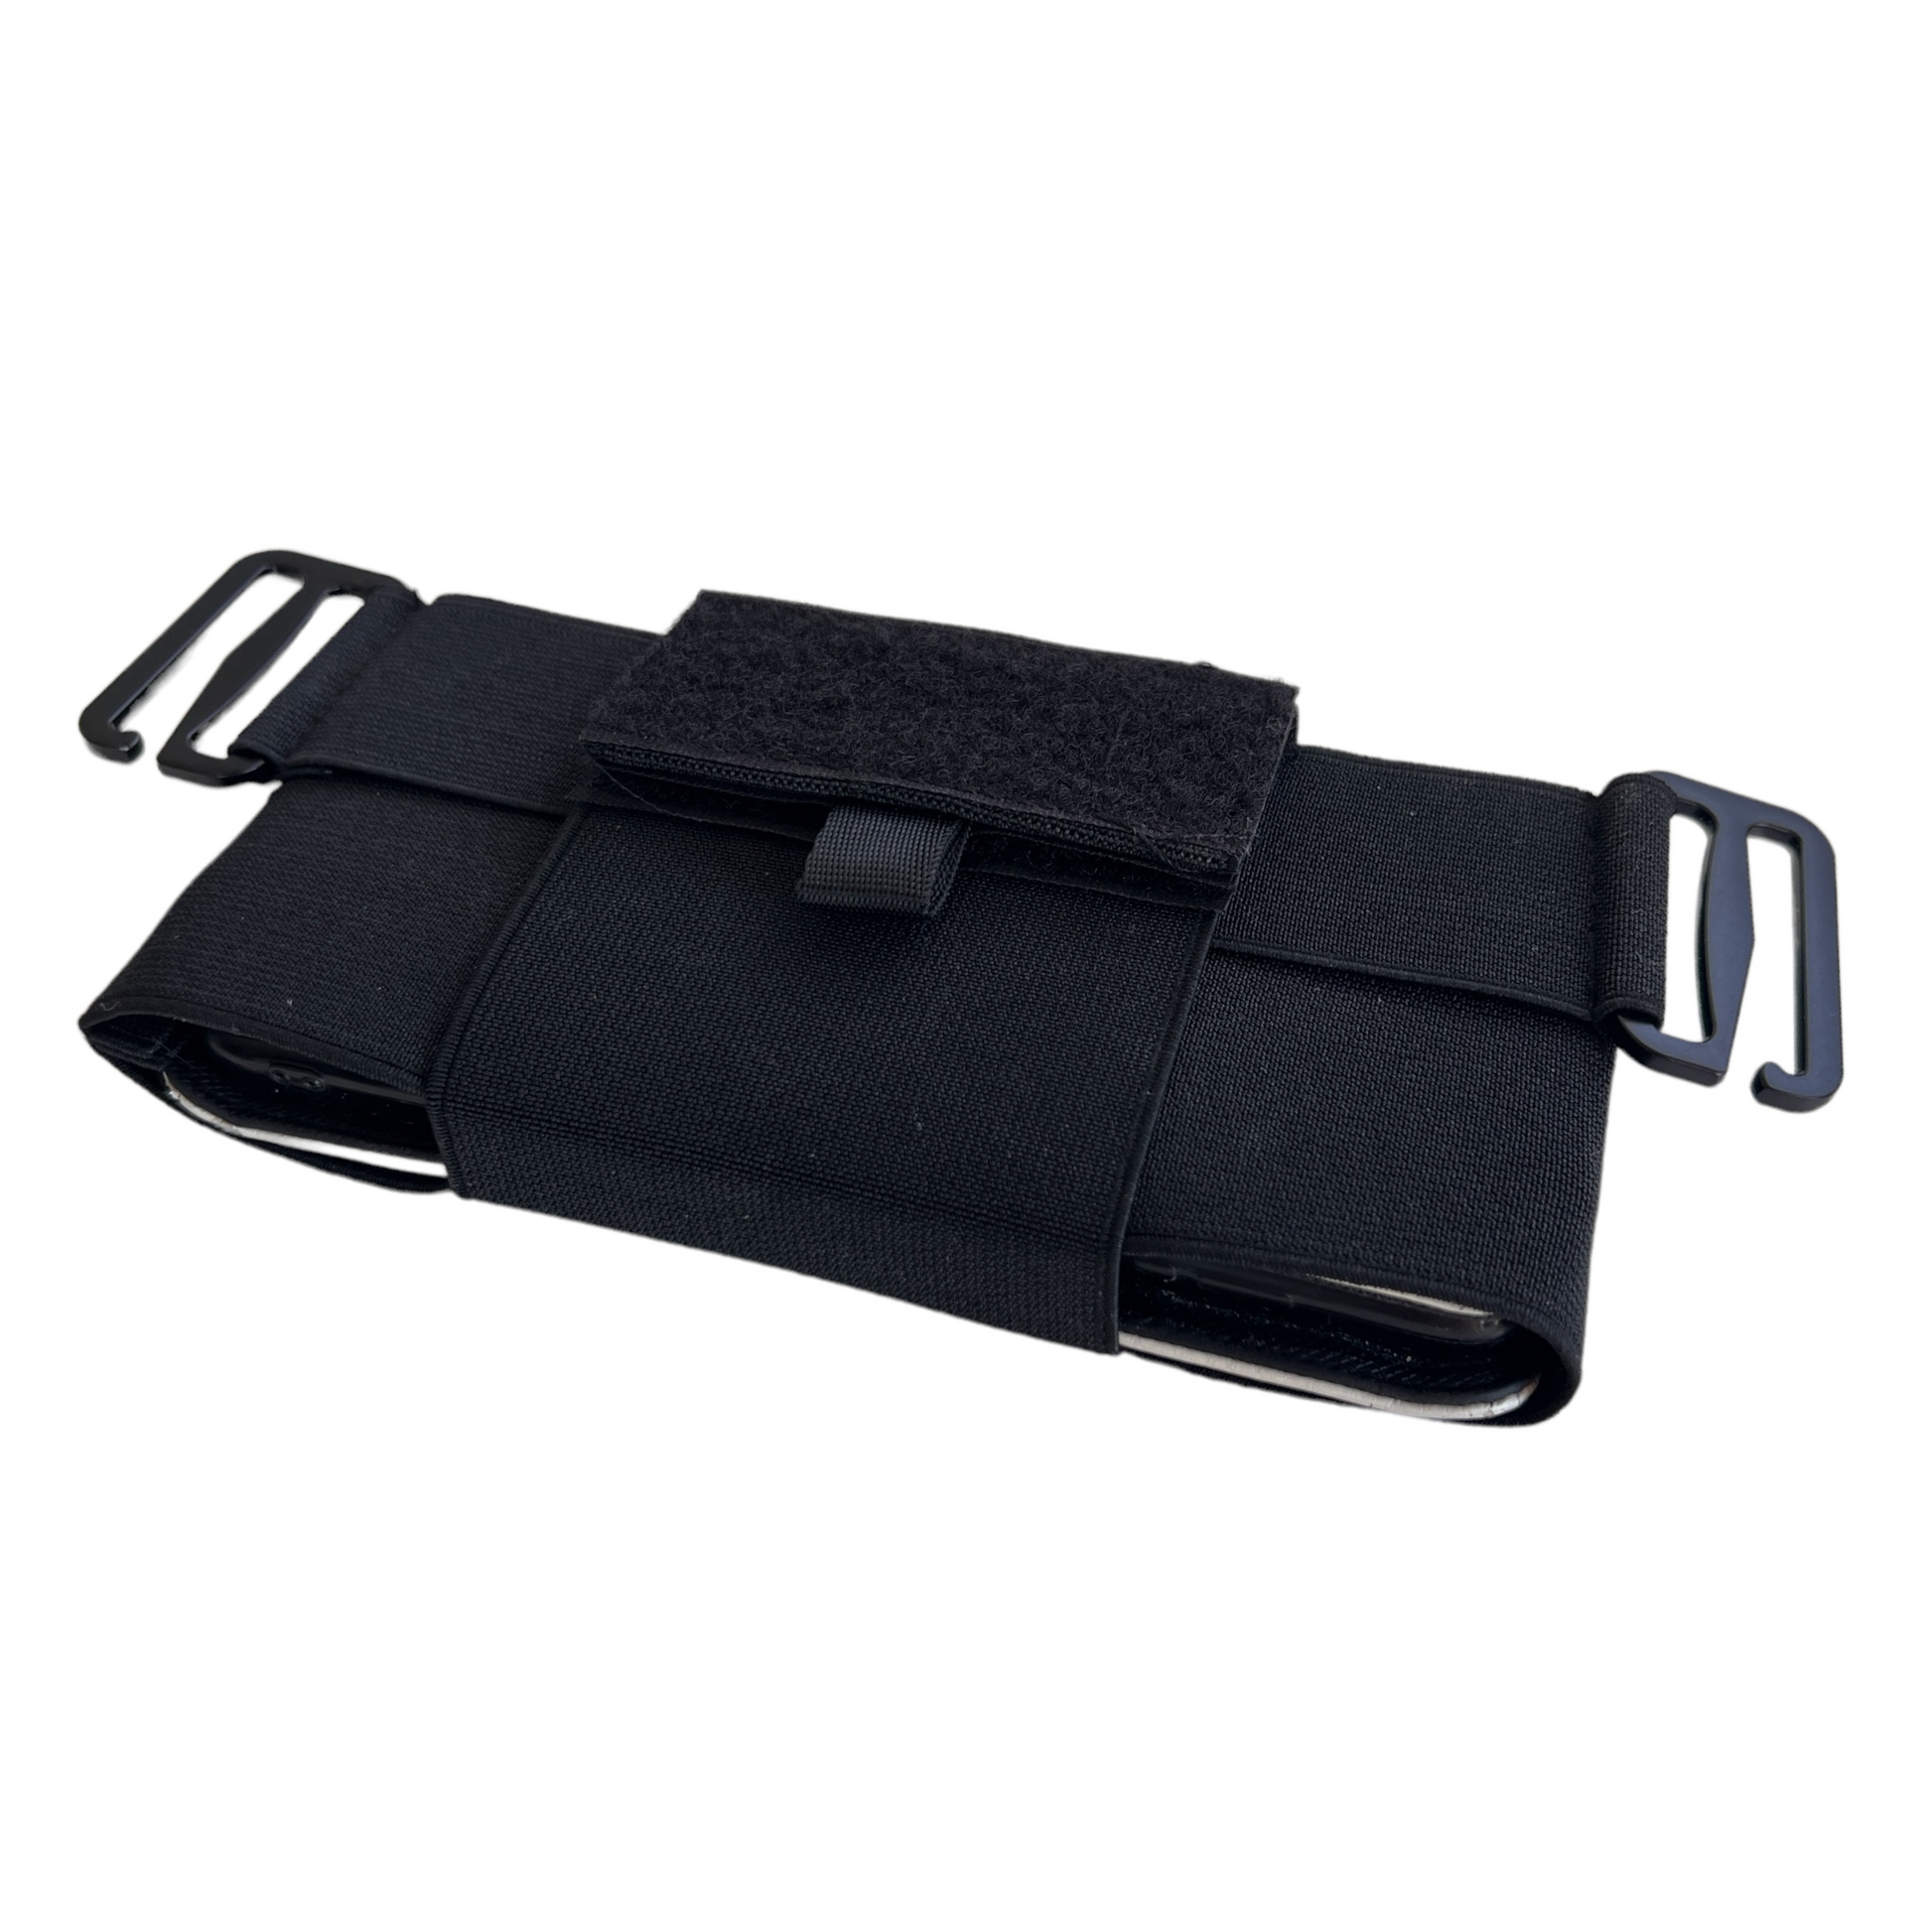 💎 Phone Pouch for Shoulder Strap, Belt, Mobility Device Mobile Phone Accessories SPIRIT SPARKPLUGS   